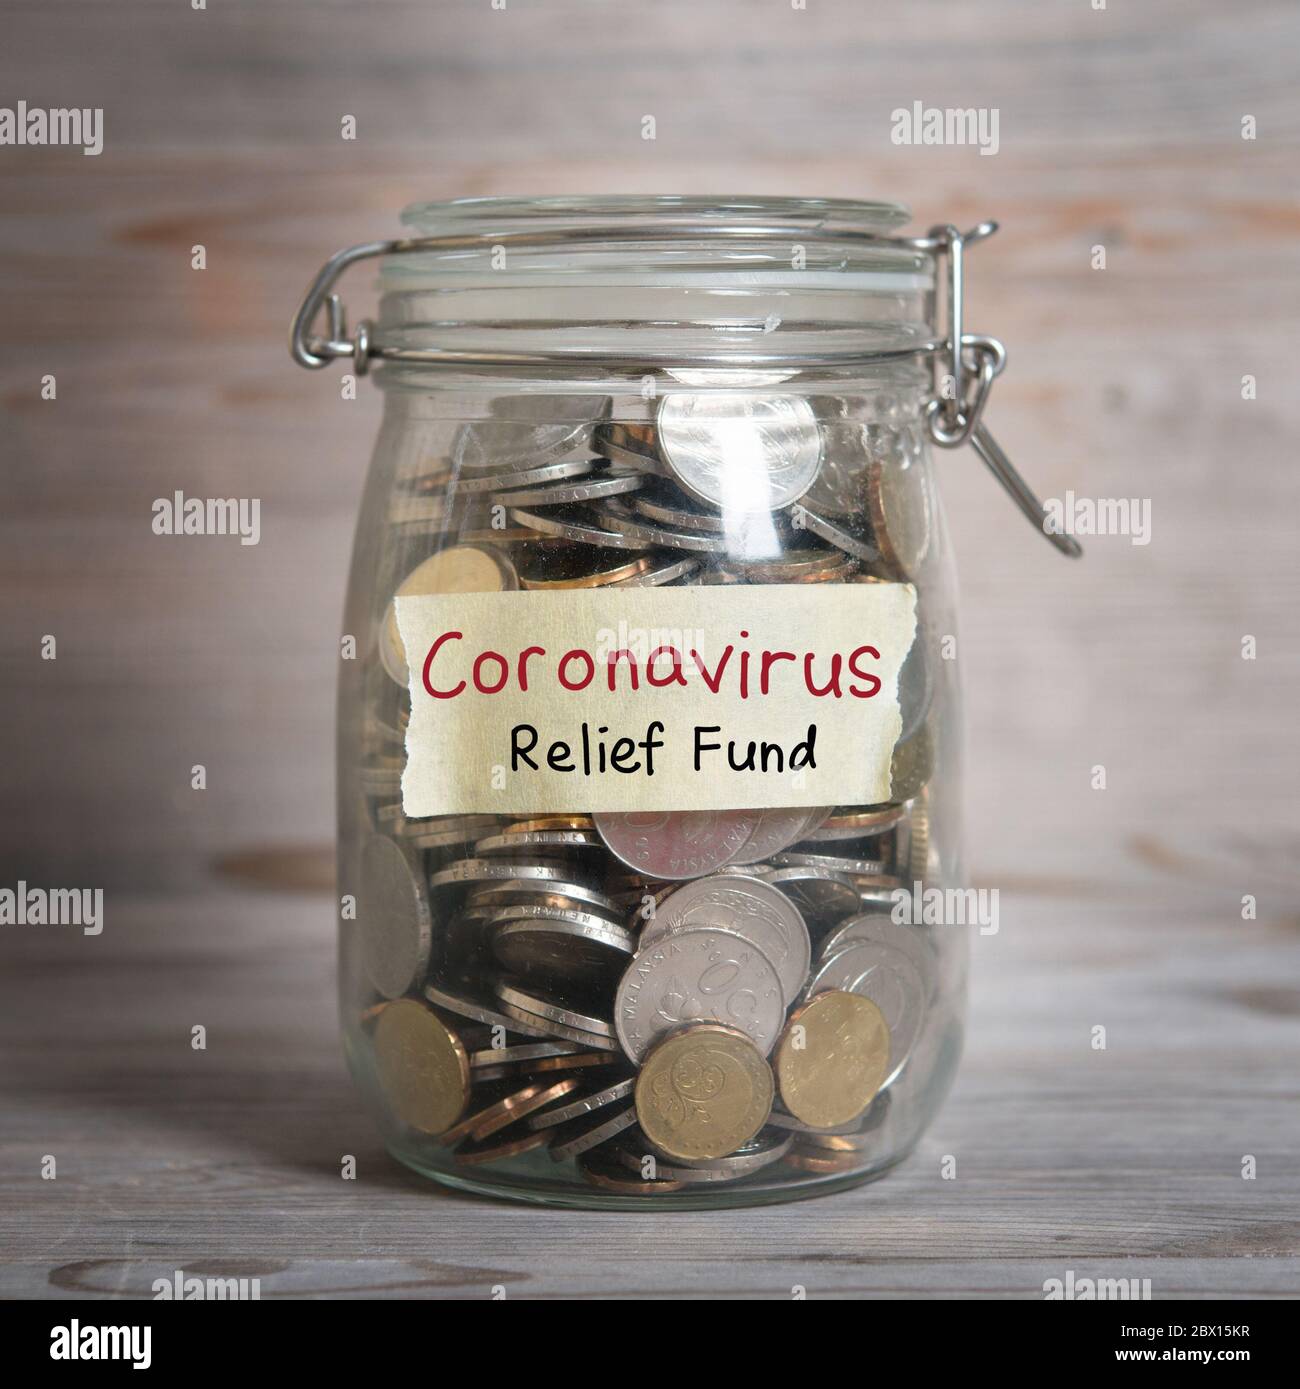 Coins in glass money jar with Coronavirus relief fund label, financial concept. Vintage wooden background with dramatic light. Stock Photo